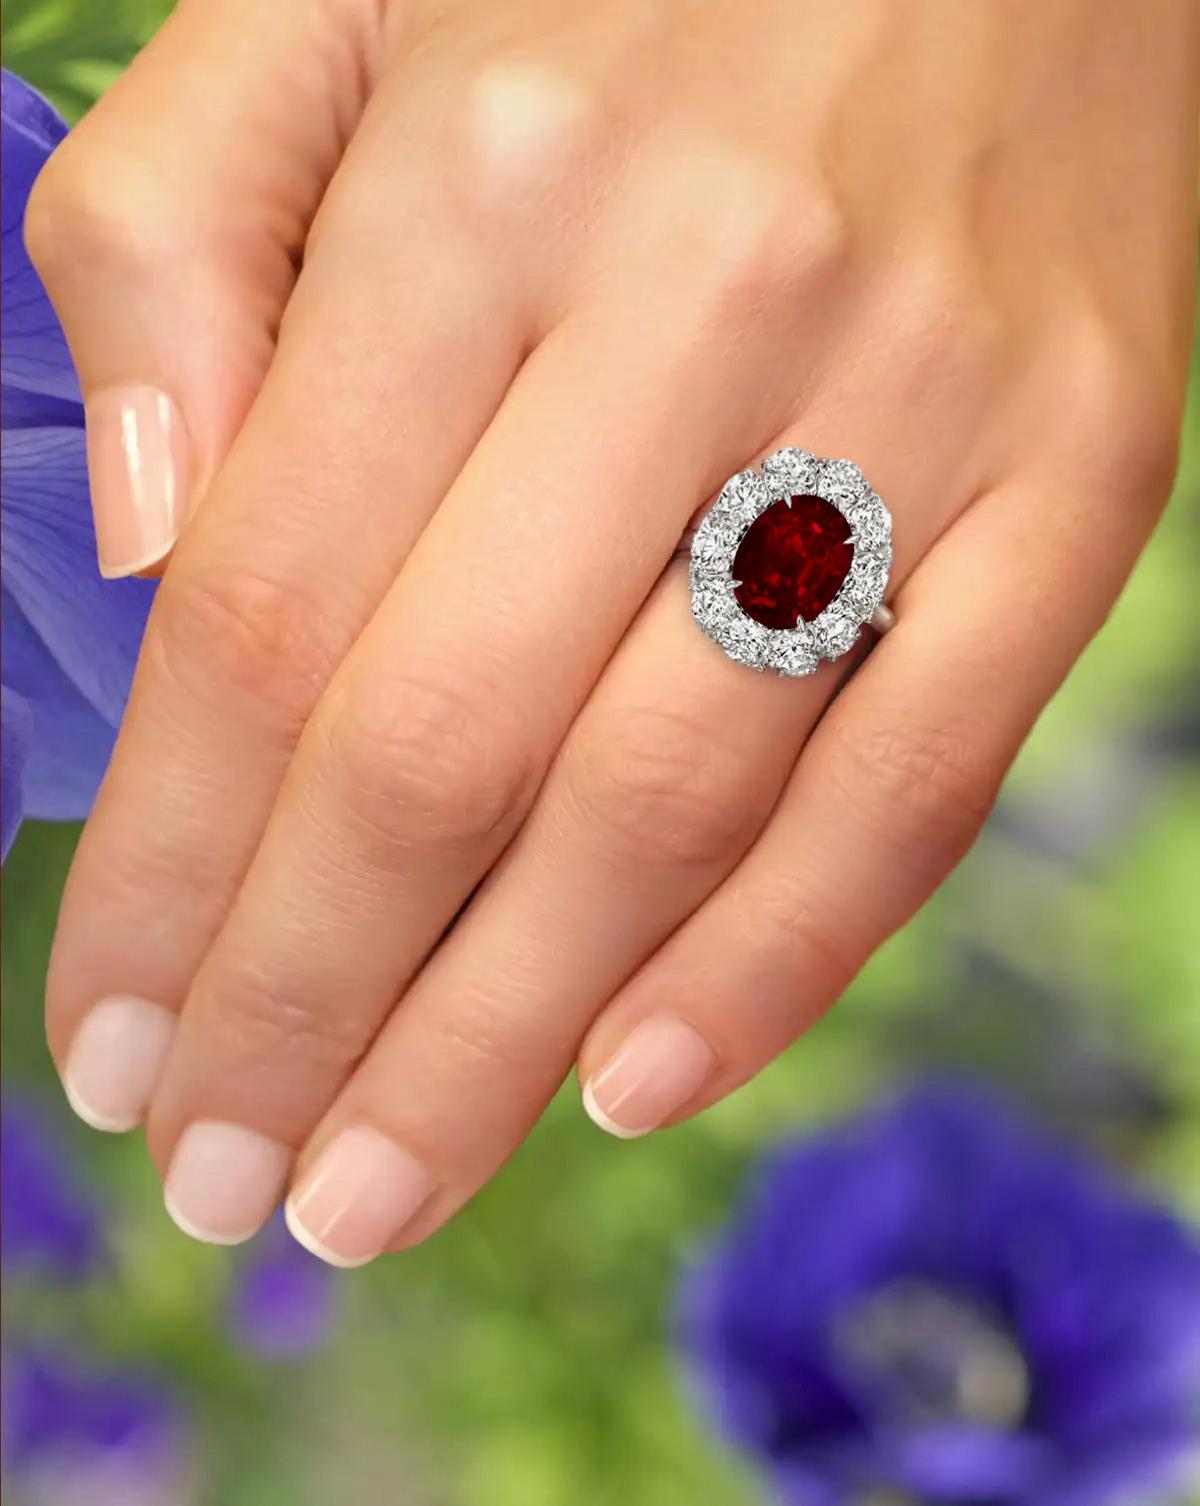 An exquisite 8 carat pinkish red purple oval no-heat ruby commands attention in this extraordinary platinum classic ring.

 A halo of approximately 1.50 carats of bright white (E/F) and (VS) diamonds encircle the stunning ruby, giving it a base of